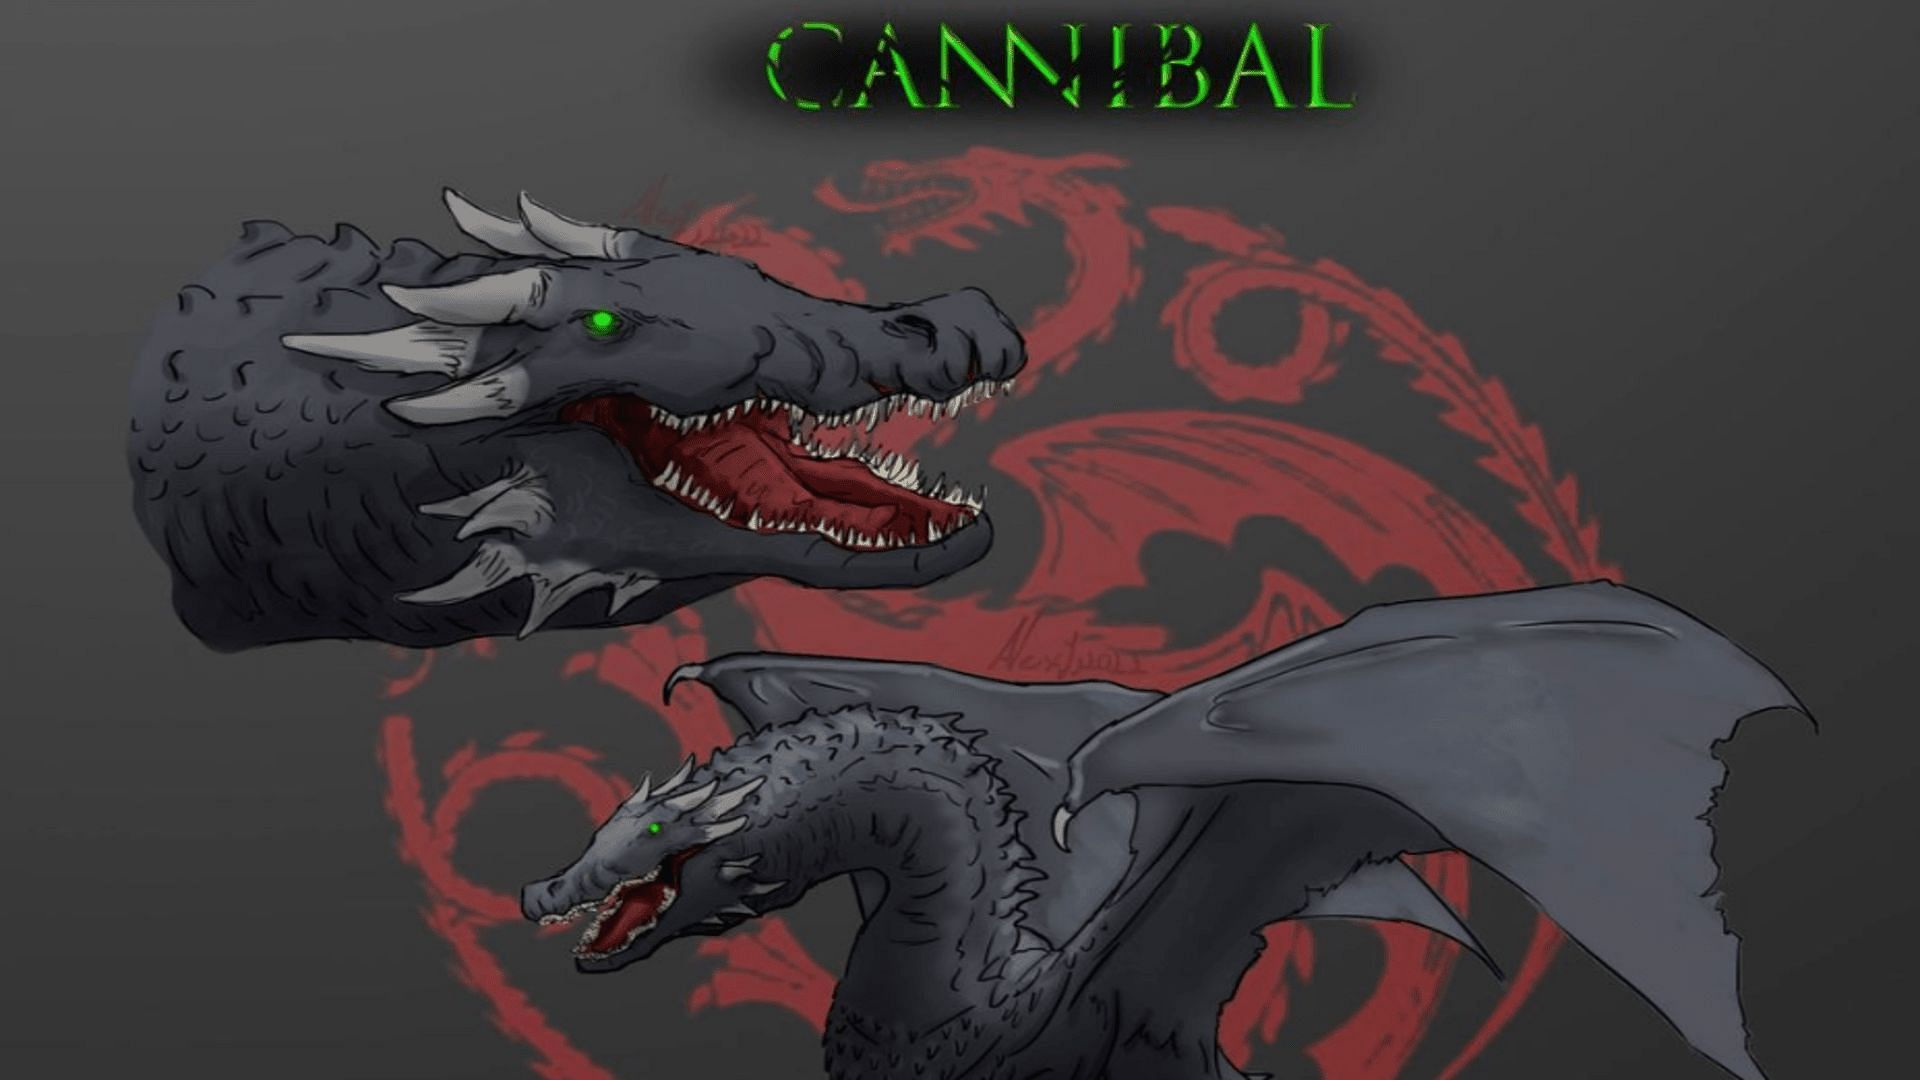 Cannibal is a black dragon with green eyes ( Image by @alex_fj2022/Instagram)